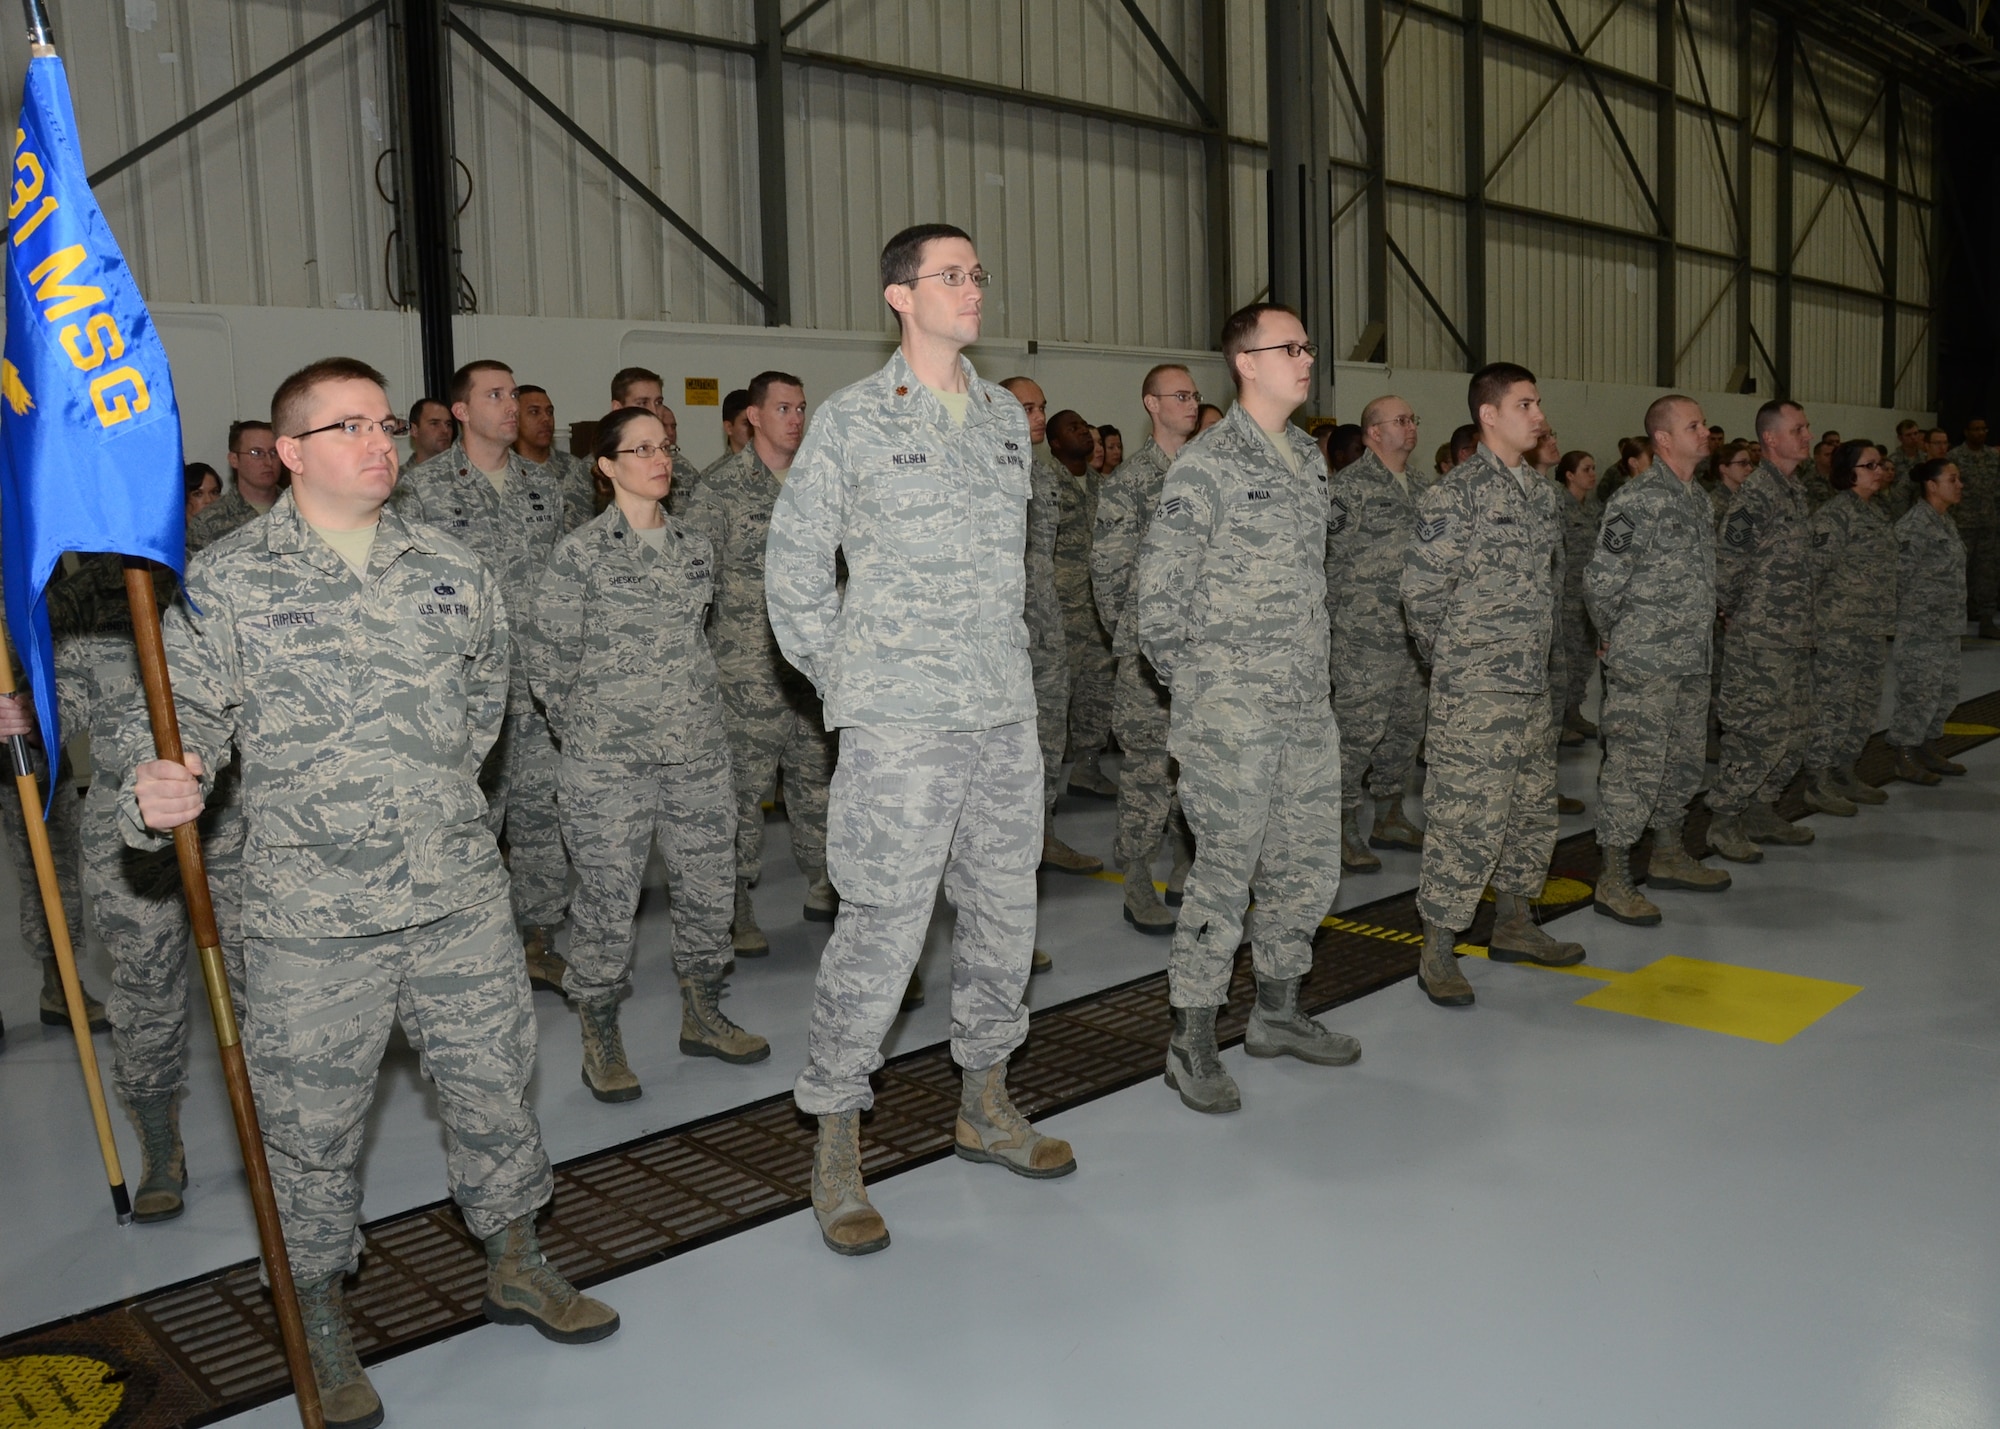 Members of the 131st Mission Support Group stand in formation during Lt. Col. Michael Jurries's 131st MSG Assumption of Command ceremony at Whiteman Air Force Base, Mo., Dec. 7, 2014.

(U.S. Air National Guard photo by Airman 1st Class Halley Burgess)